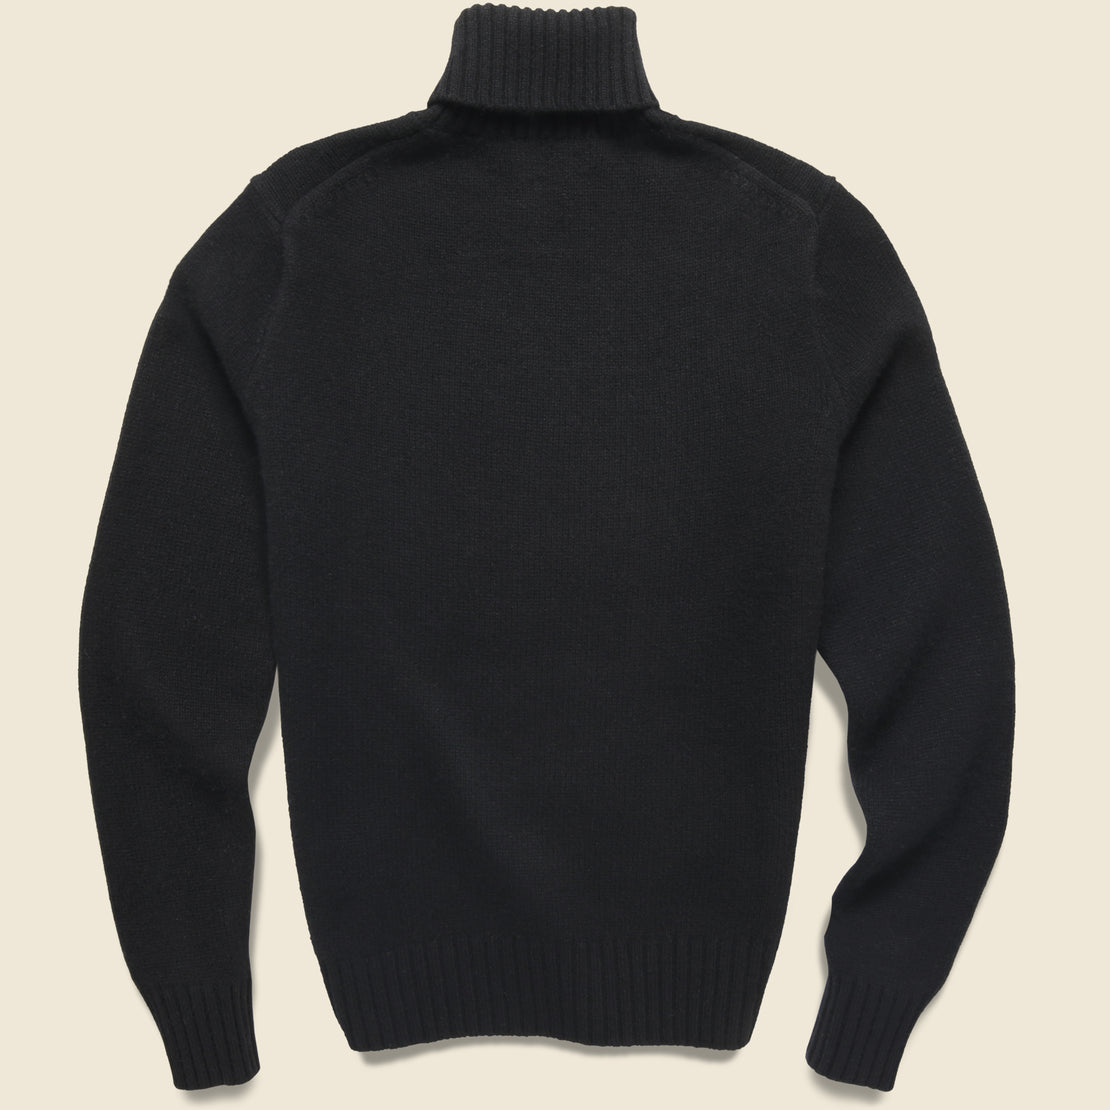 Holiday Bear Turtleneck Sweater - Black - Polo Ralph Lauren - STAG Provisions - Tops - Sweater